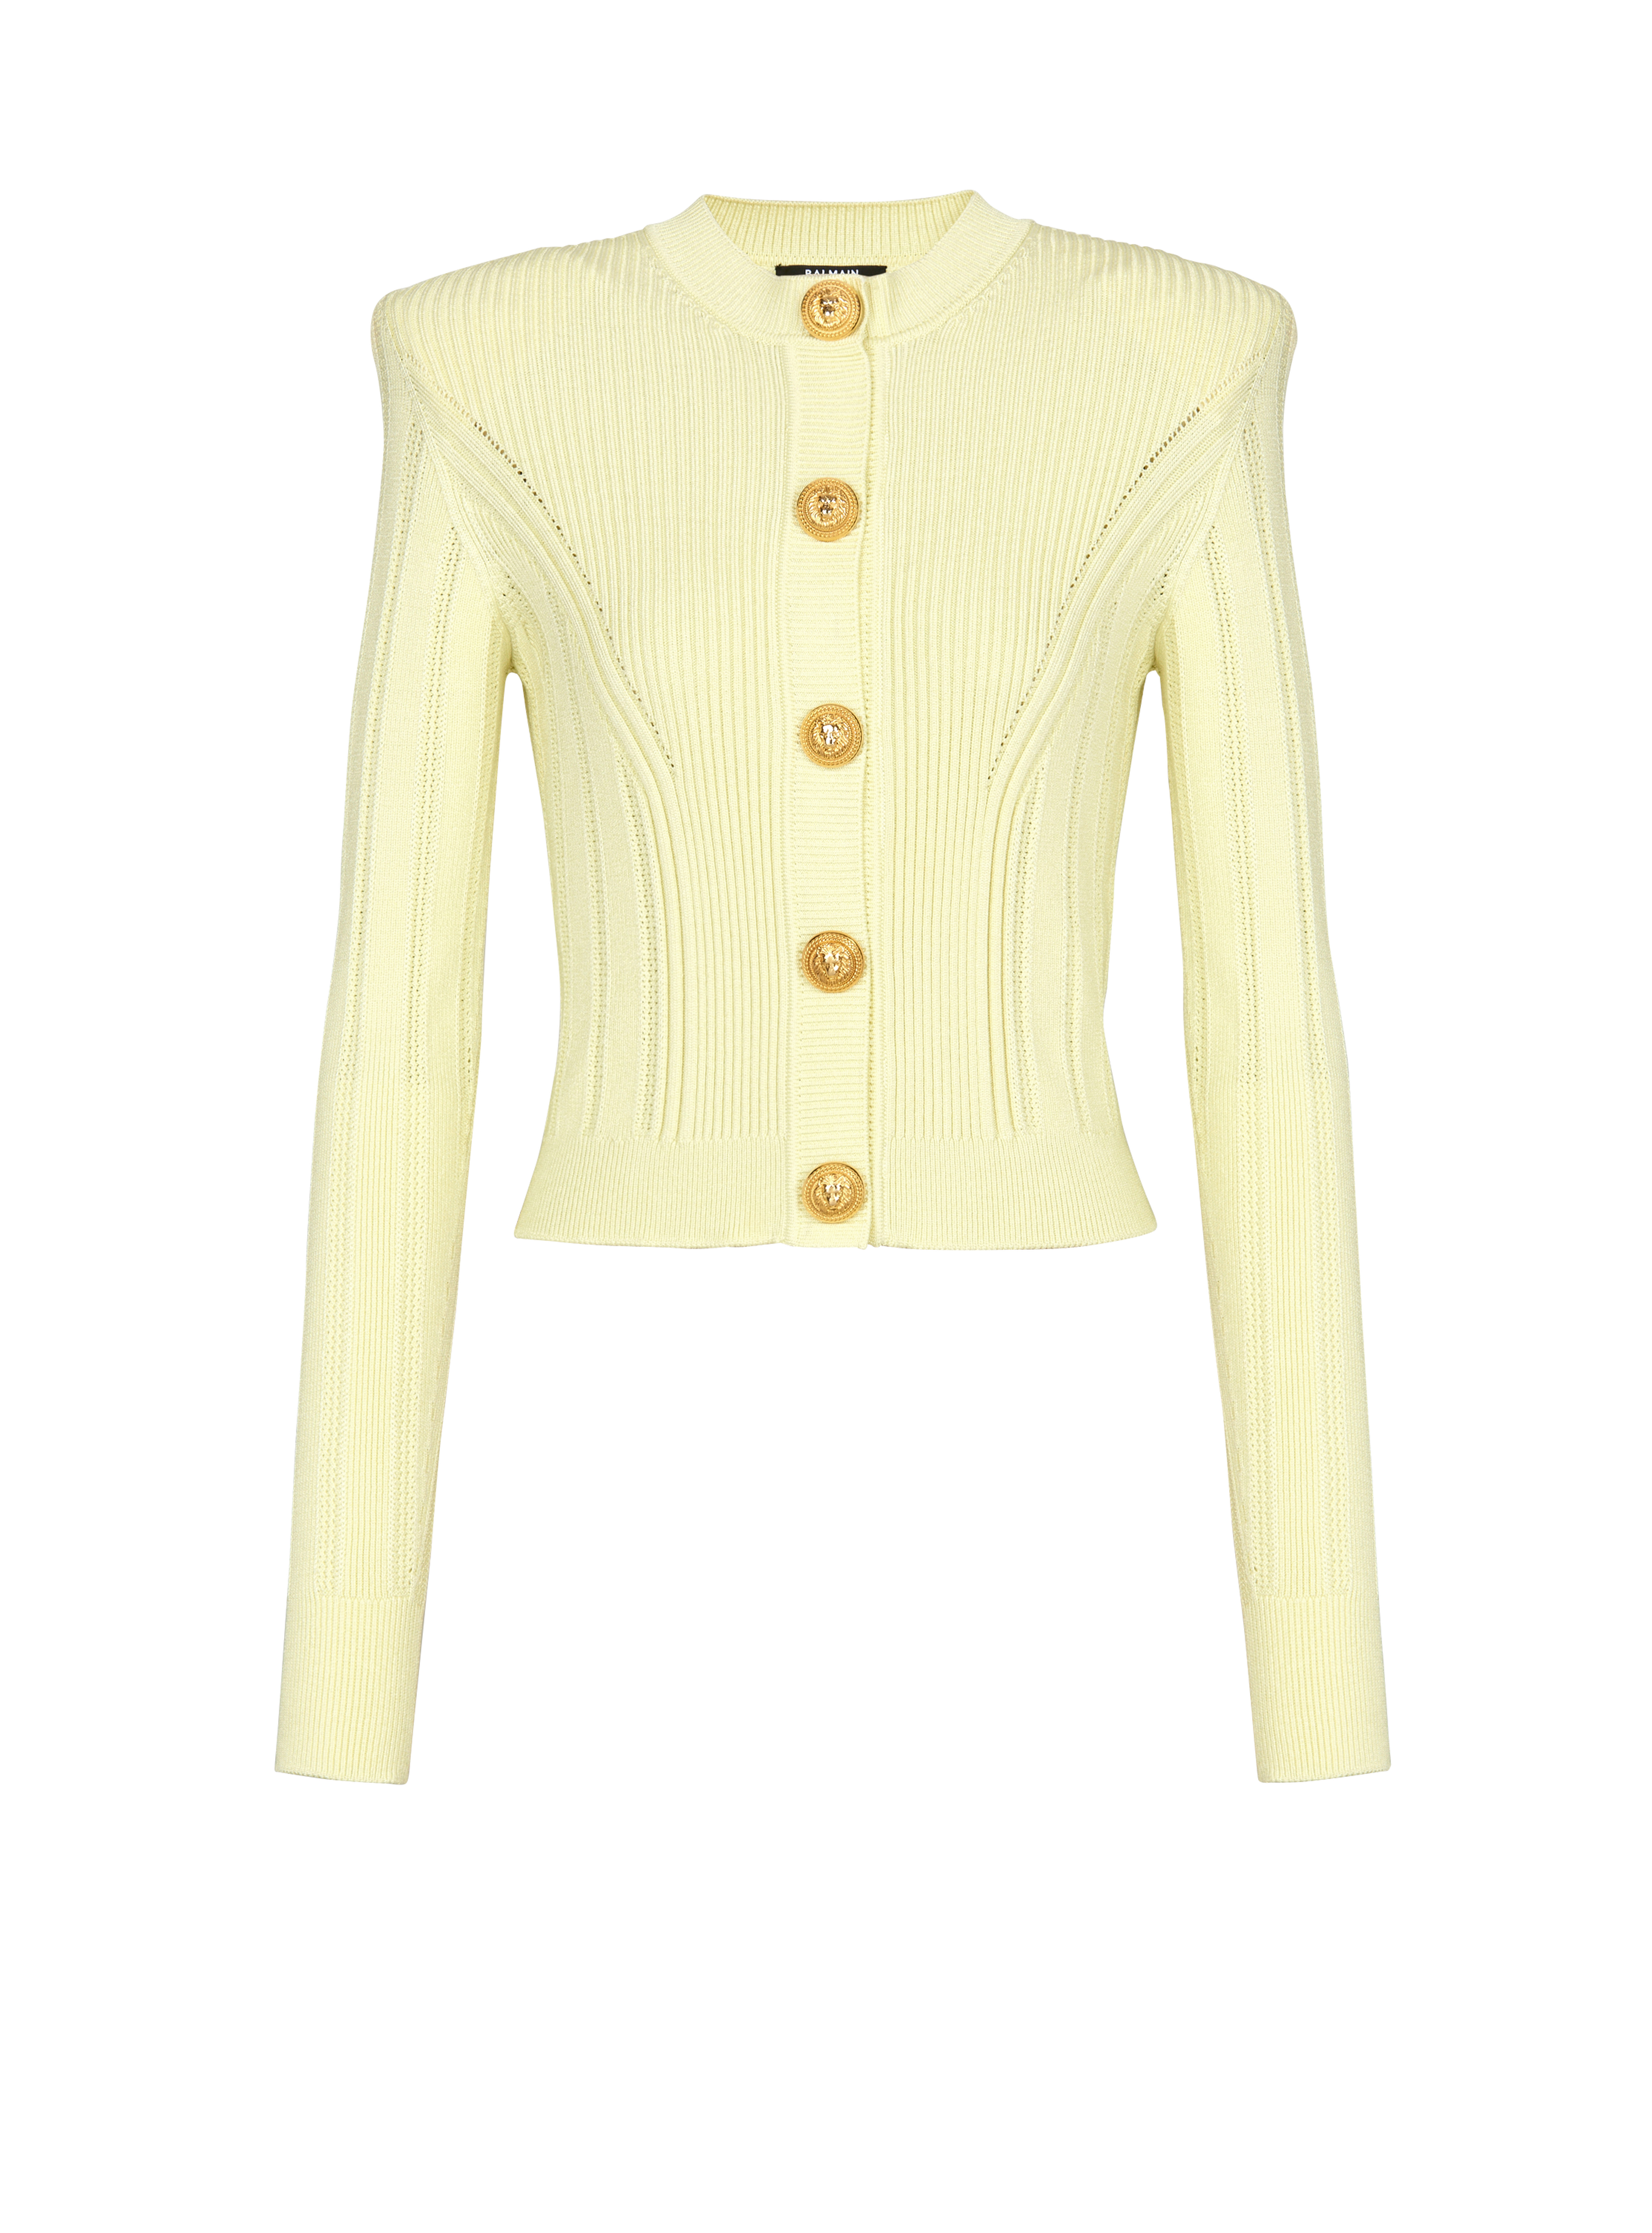 Knit cardigan with gold buttons, yellow